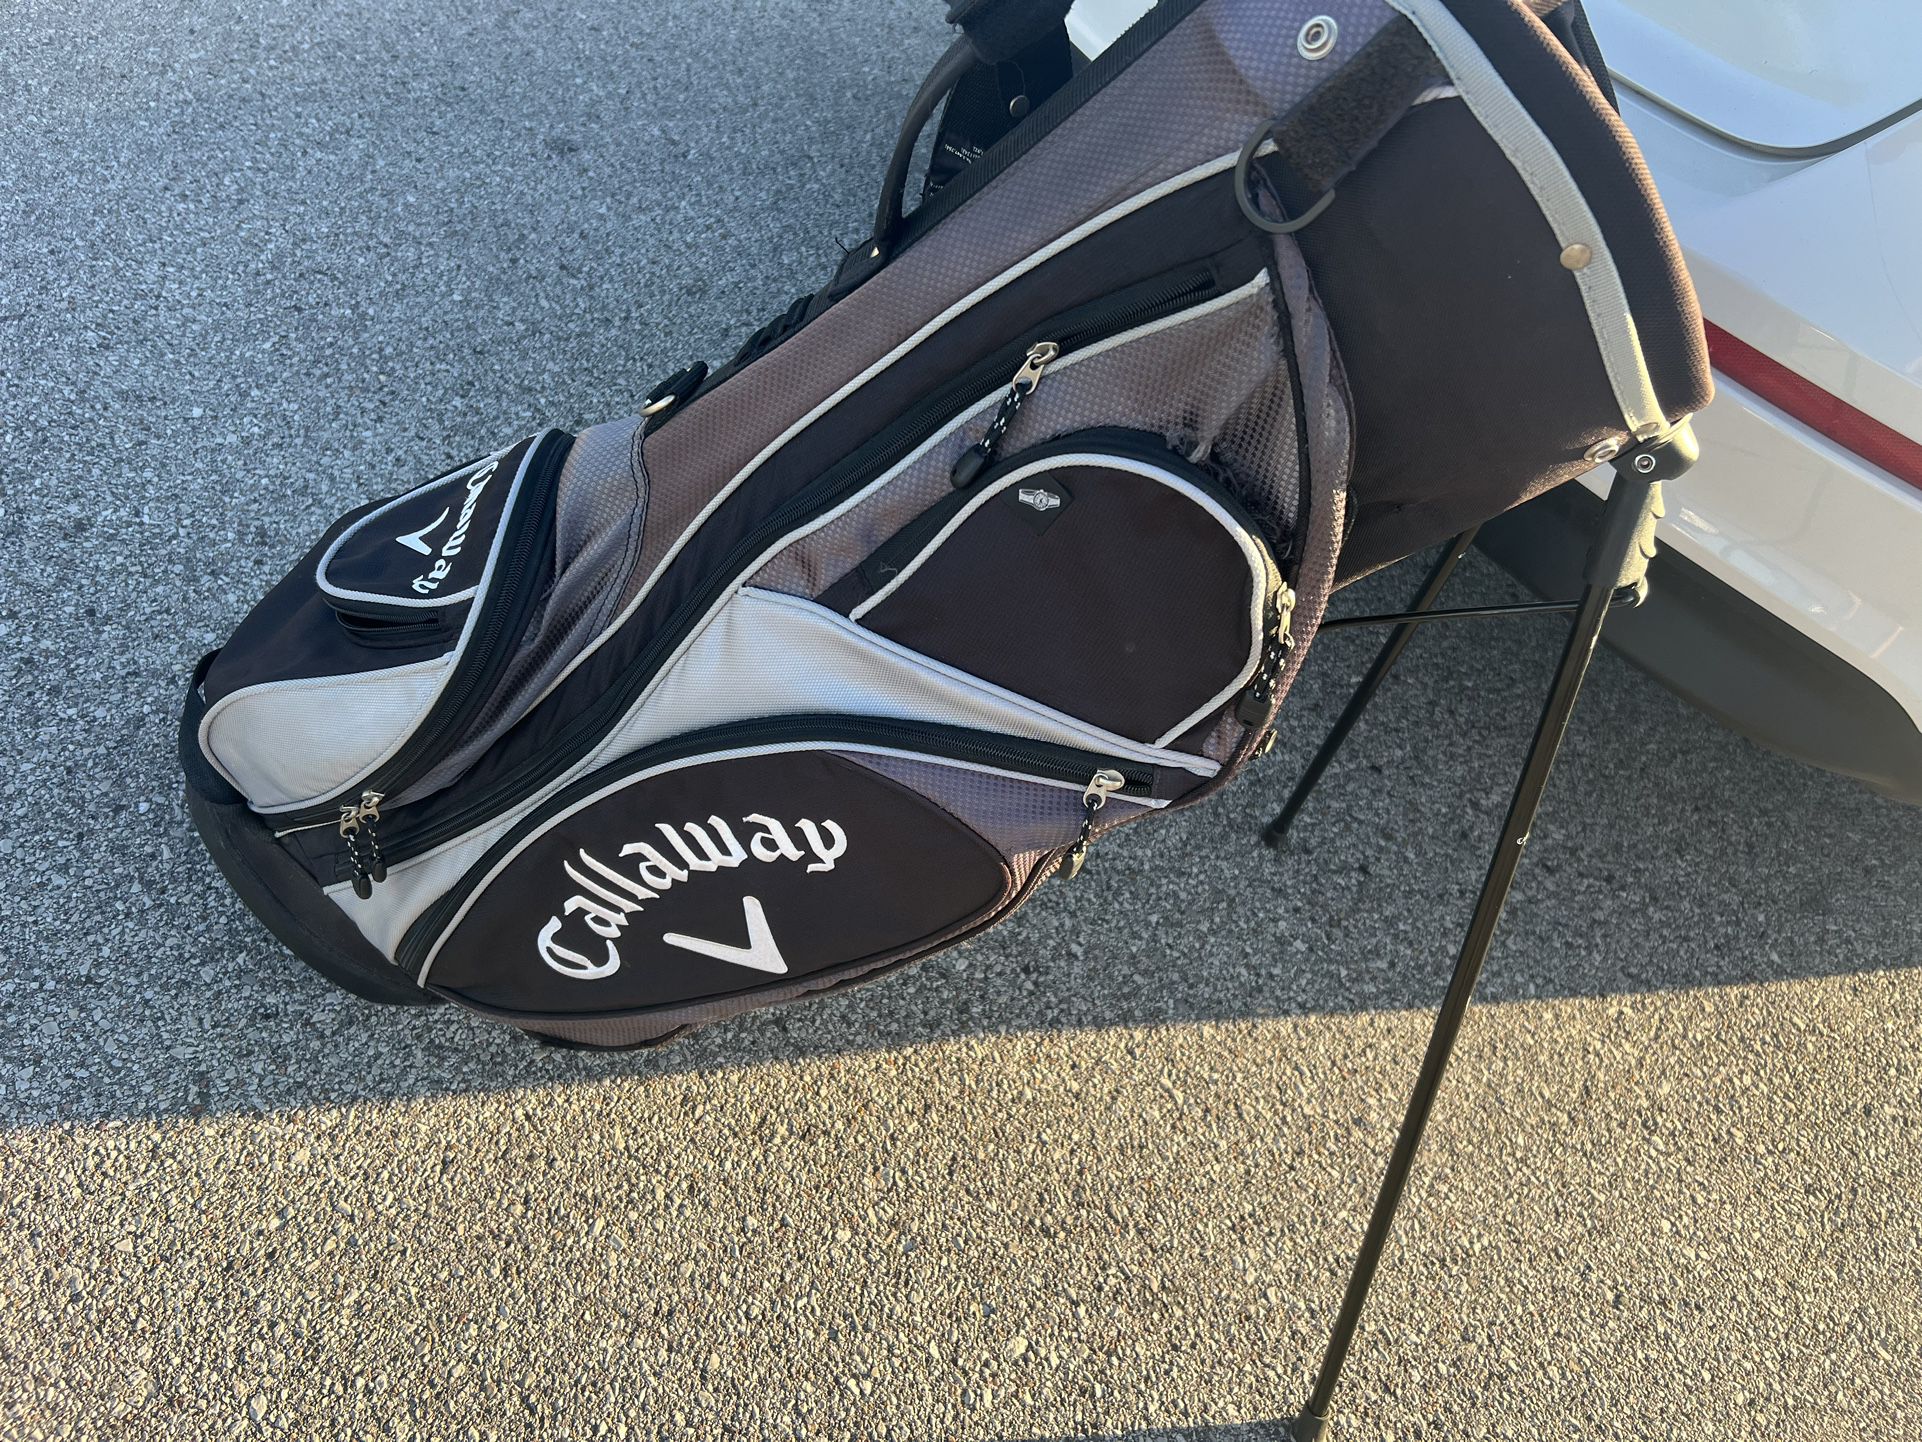 Golf, callaway bag, super lightweight, two straps, One cosmetic issue. no impact performance, $89